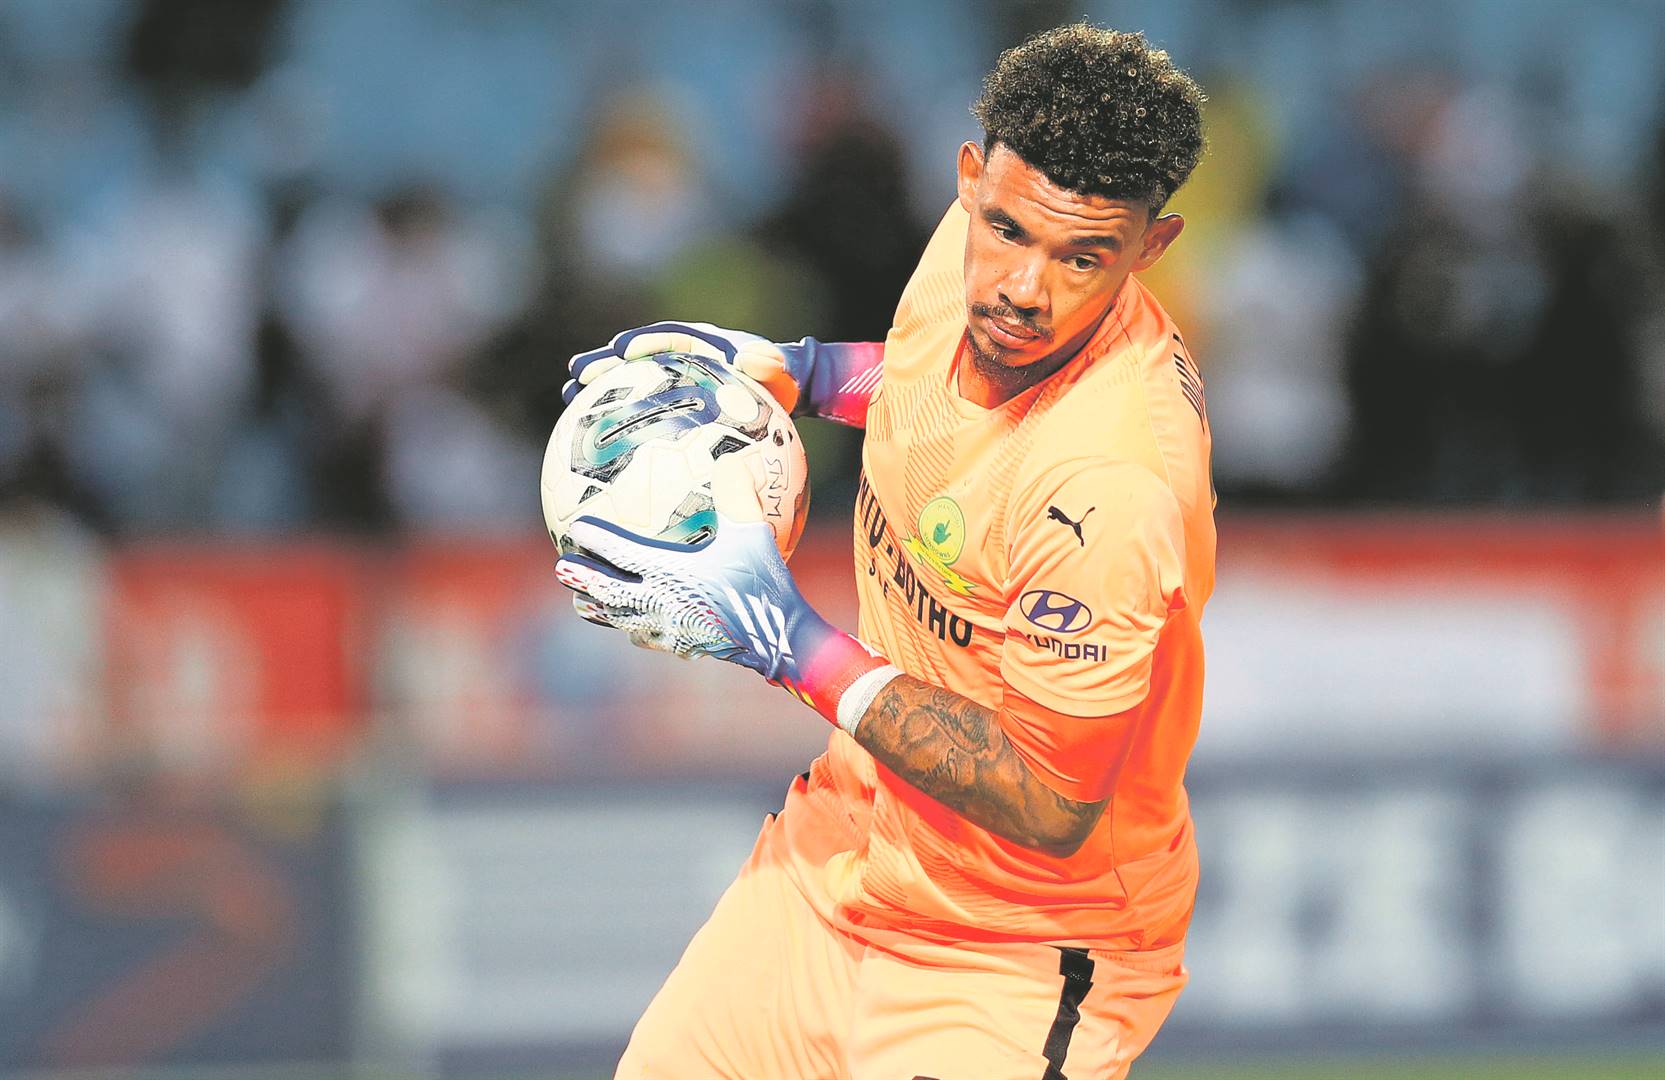 Ronwen Williams’ first season at Mamelodi Sundowns has been so impressive that fellow players, coaches and commentators have tipped him to win the PSL Player of the Season award.  